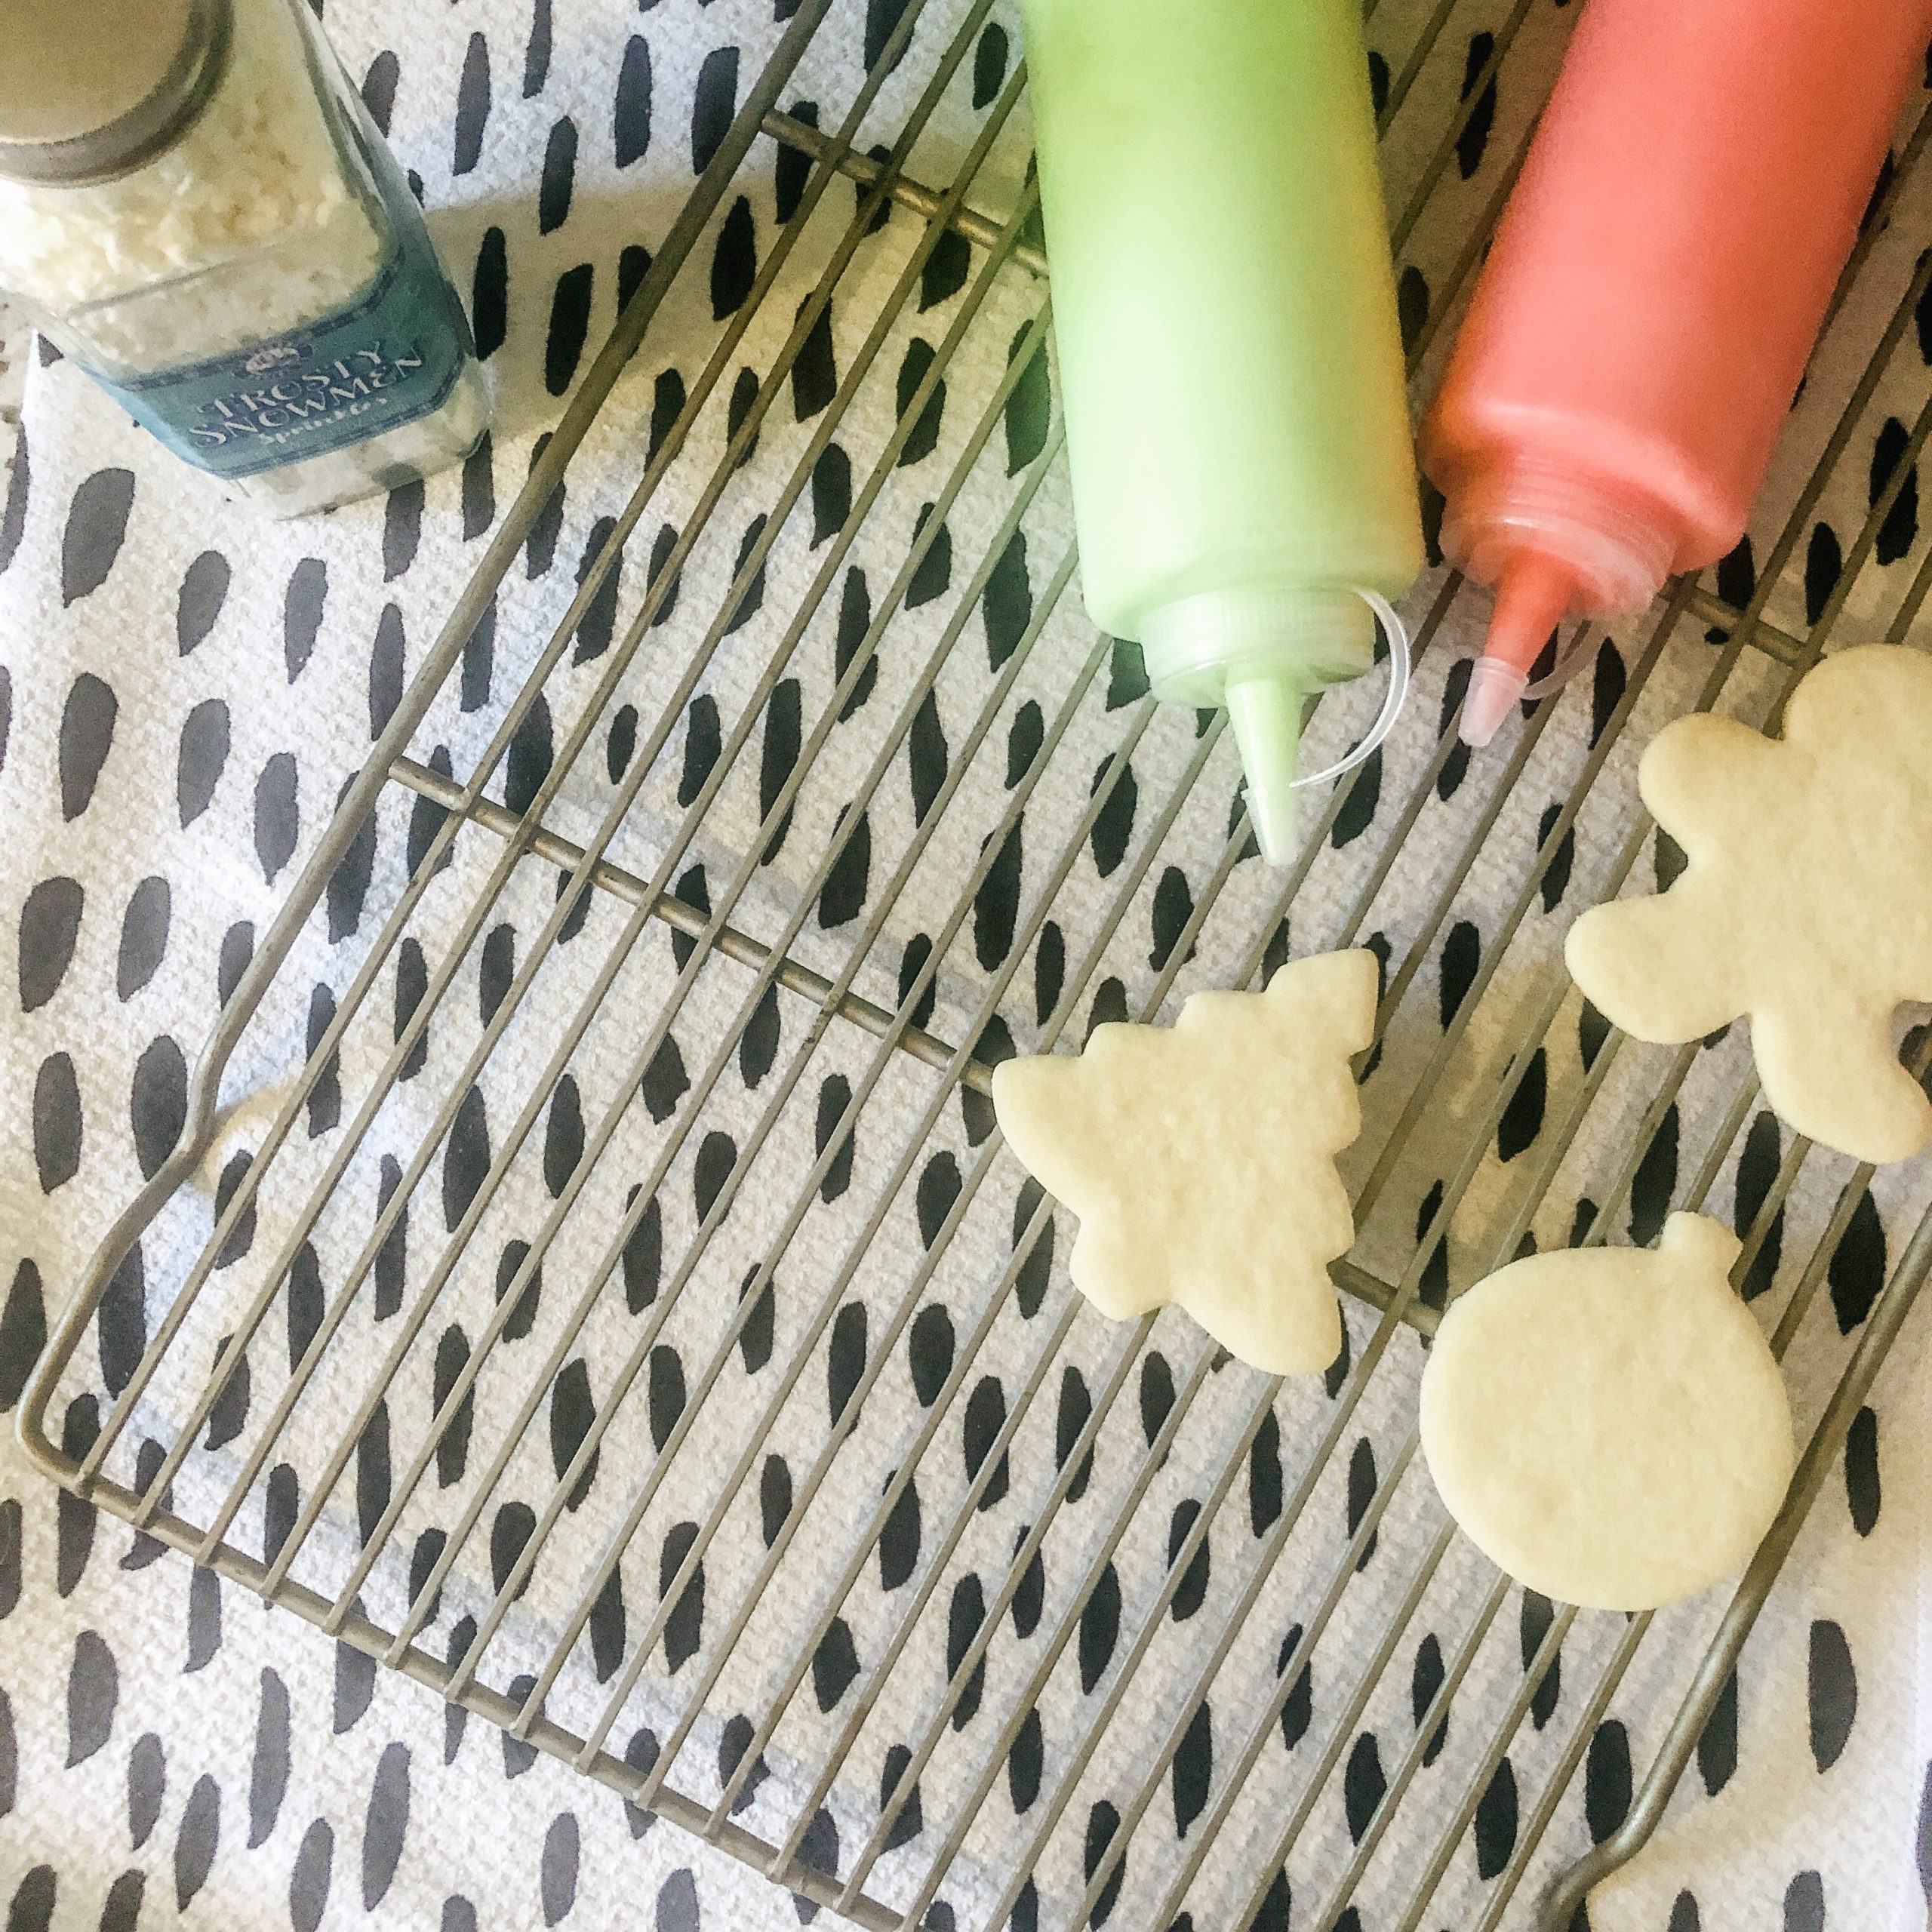 royal icing for sugar cookies in squeezable condiment bottles